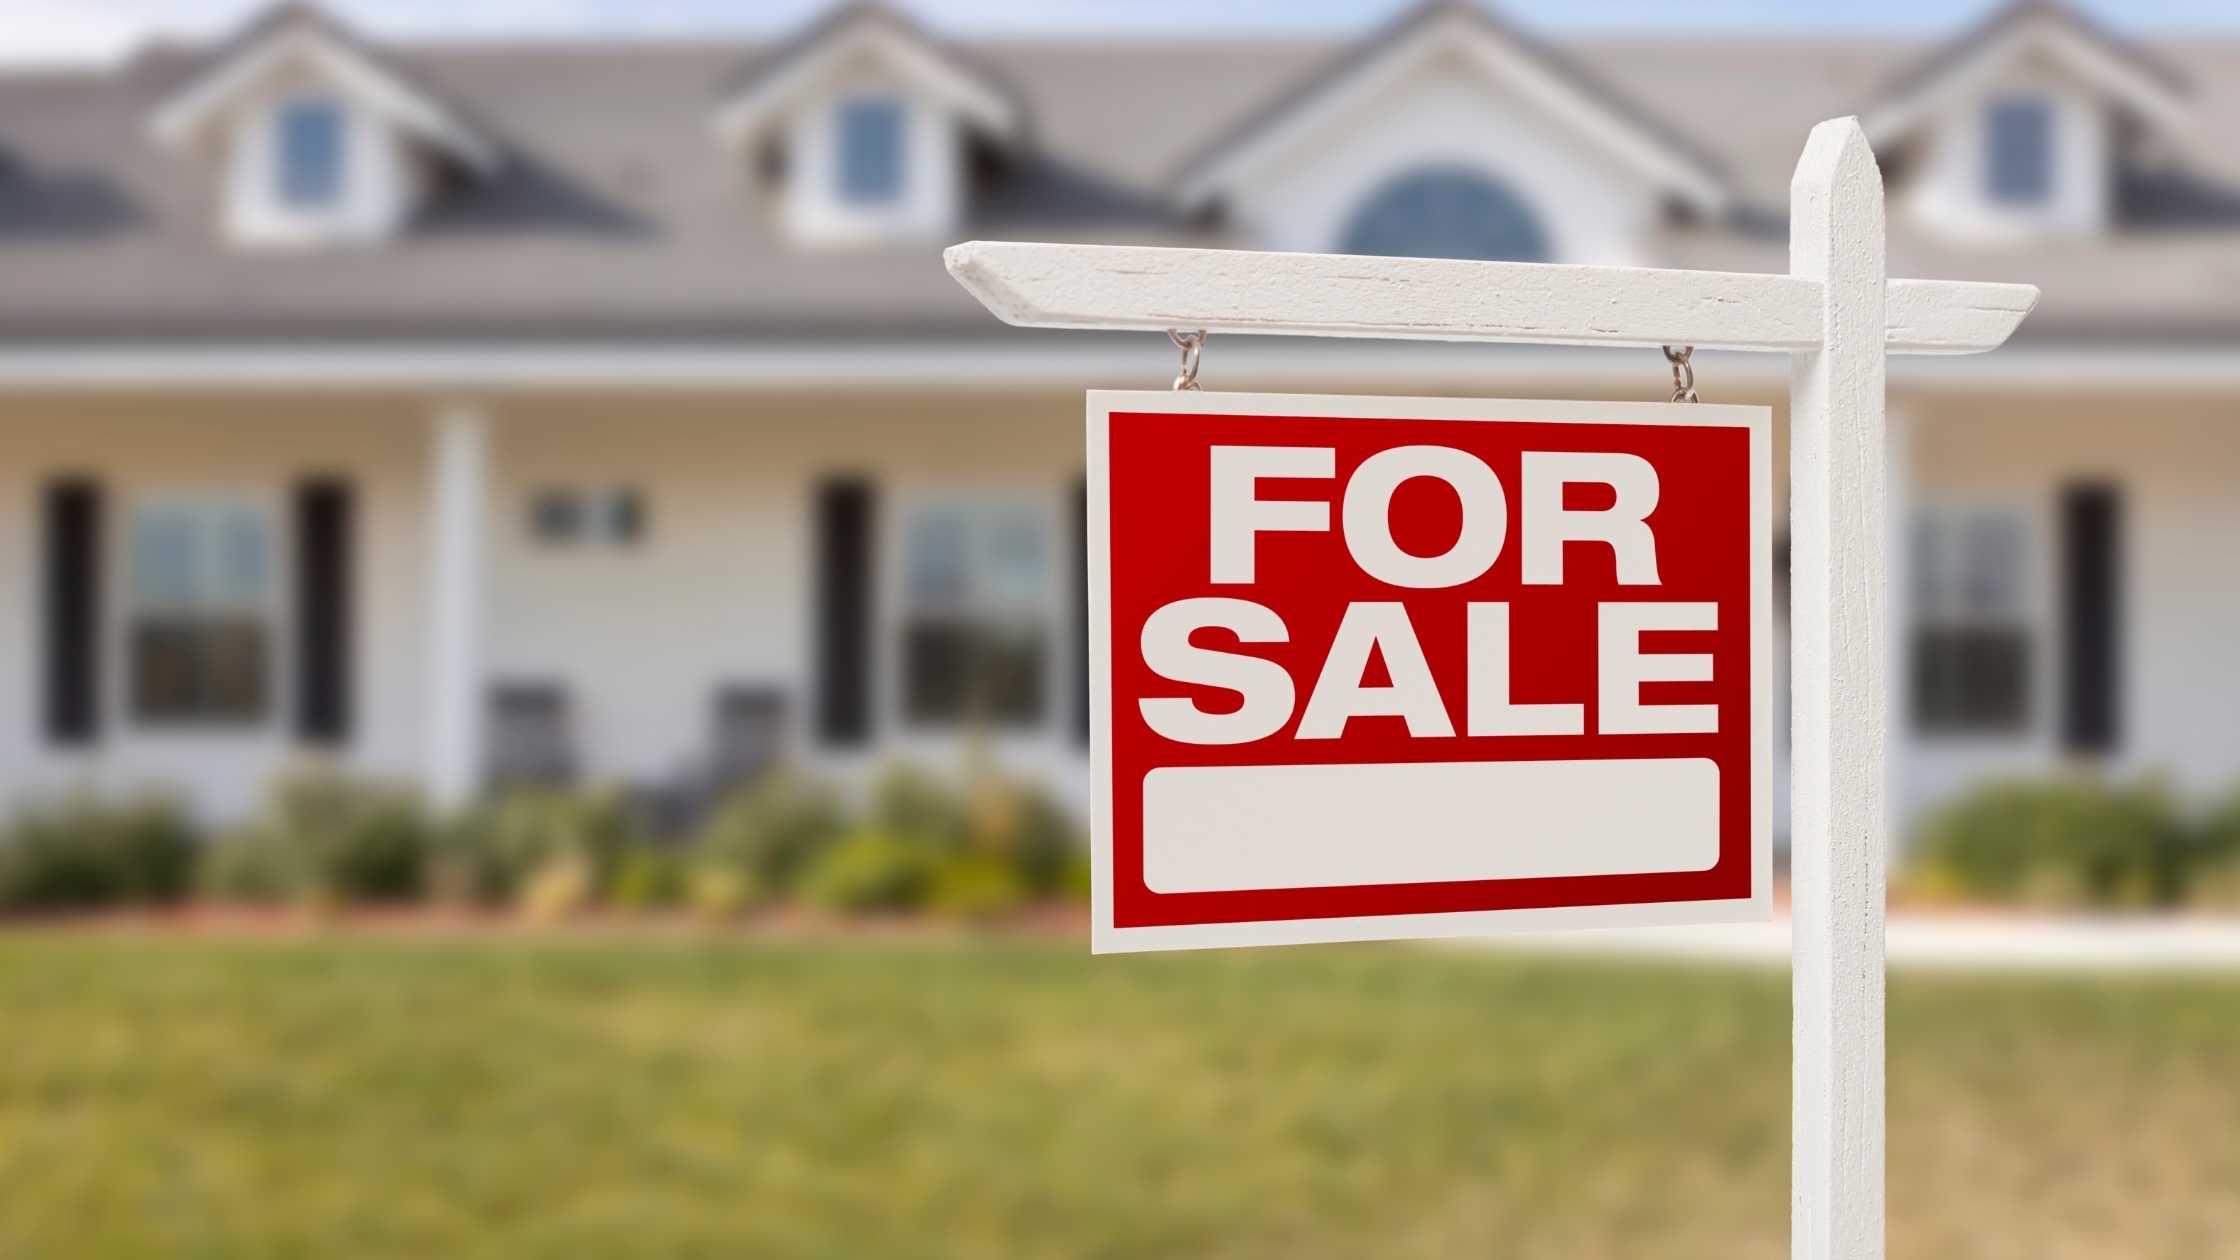 Can I Increase the Asking Price of My House in Charlotte, NC?